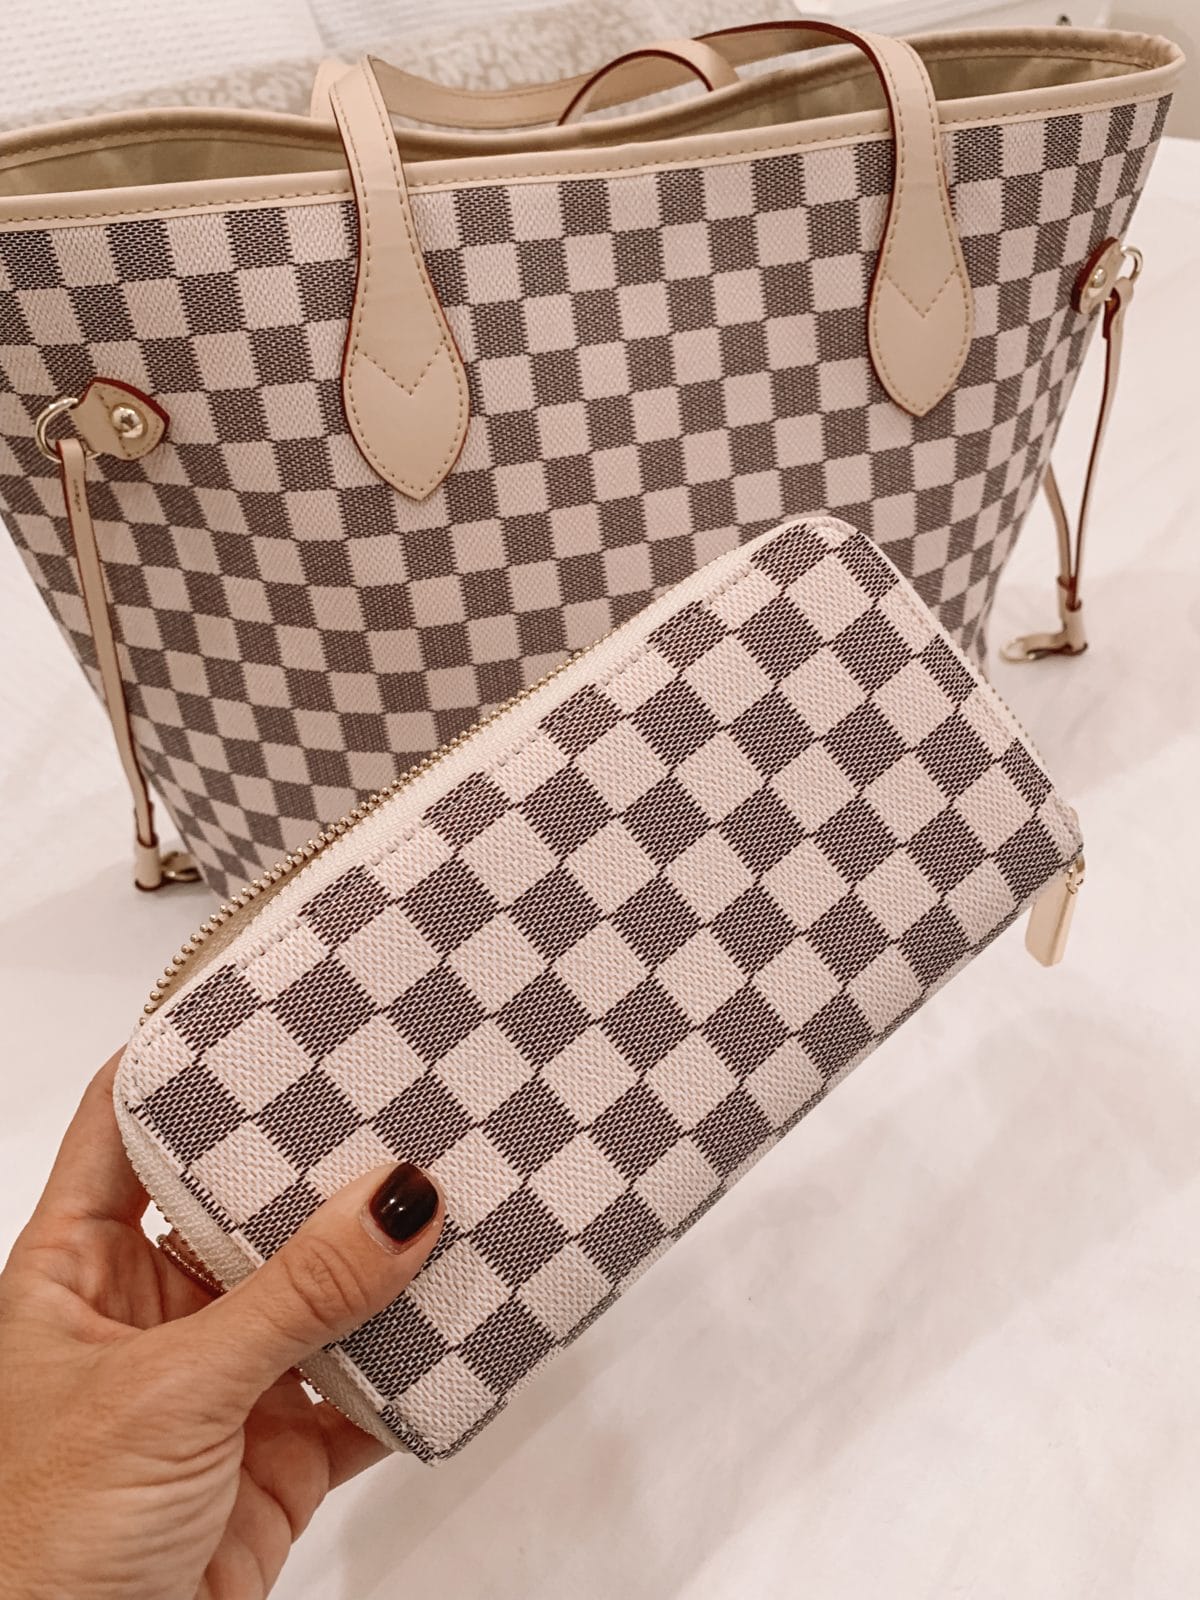 Amazon fashion haul, checkered tote and wallet 